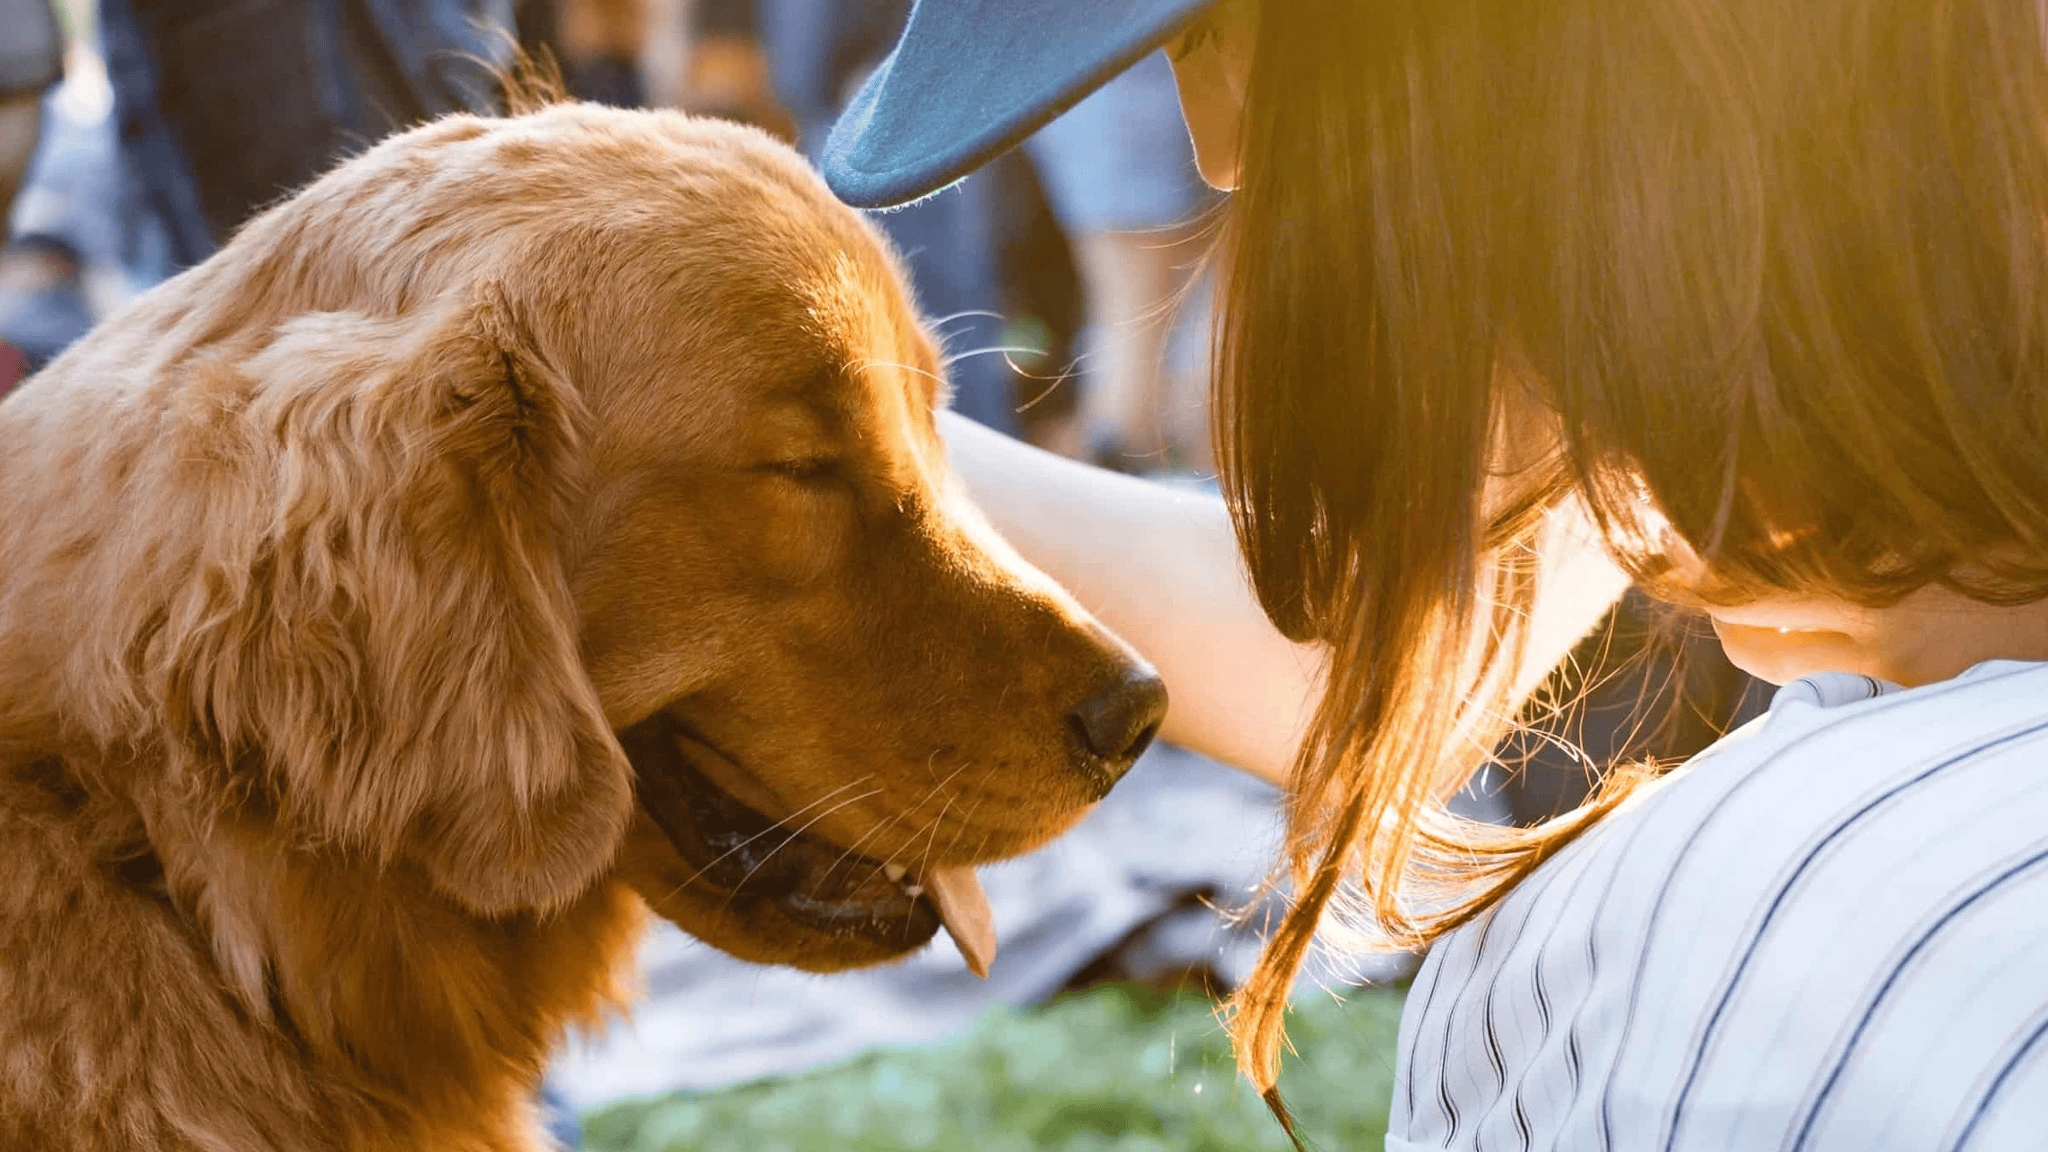 A golden retriever basks in the warm glow of love as it relishes shared moments of affection between two individuals under the open sky at an event called Goldie Palooza, a must-visit extravaganza for dog-lovers seeking fun-filled activities to enjoy with their pets. - Dogtrekker